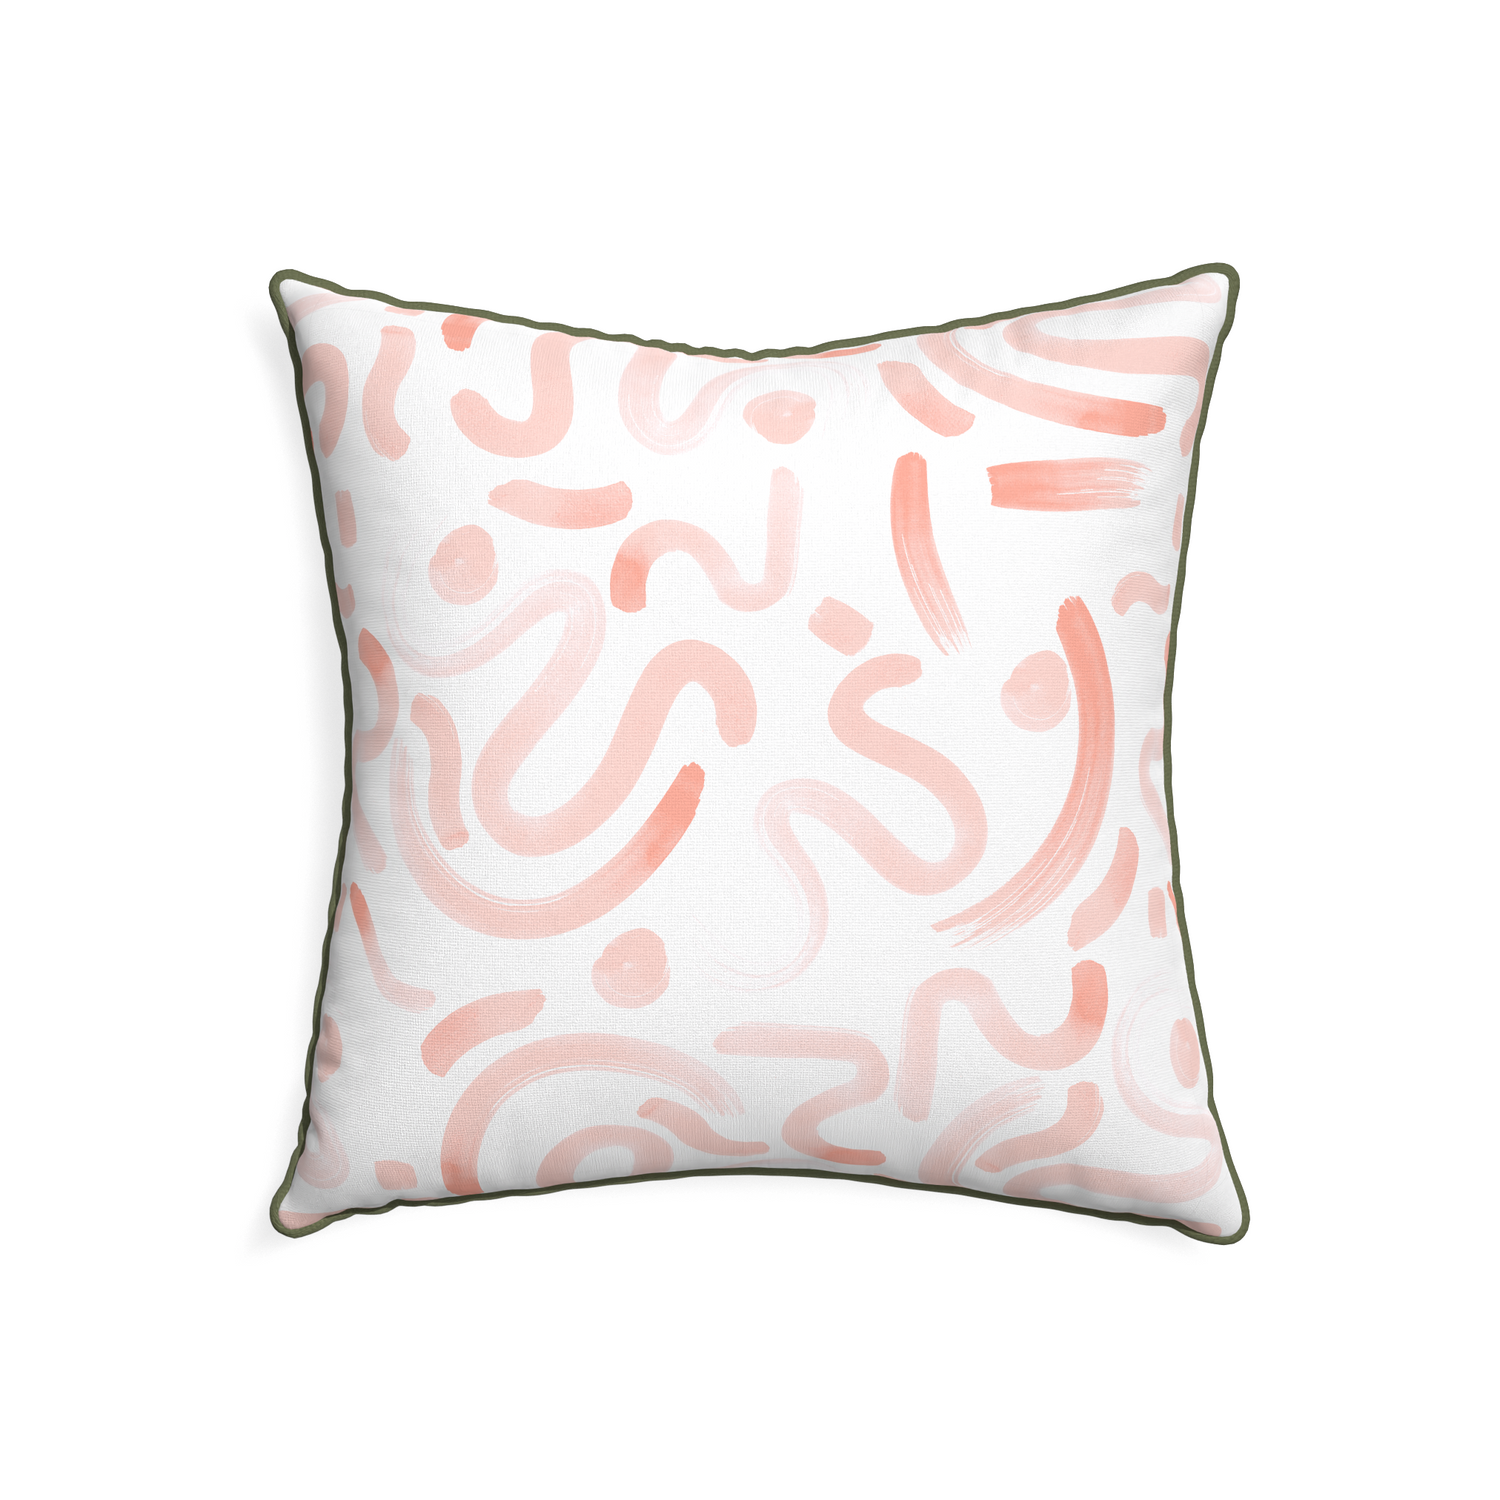 22-square hockney pink custom pillow with f piping on white background